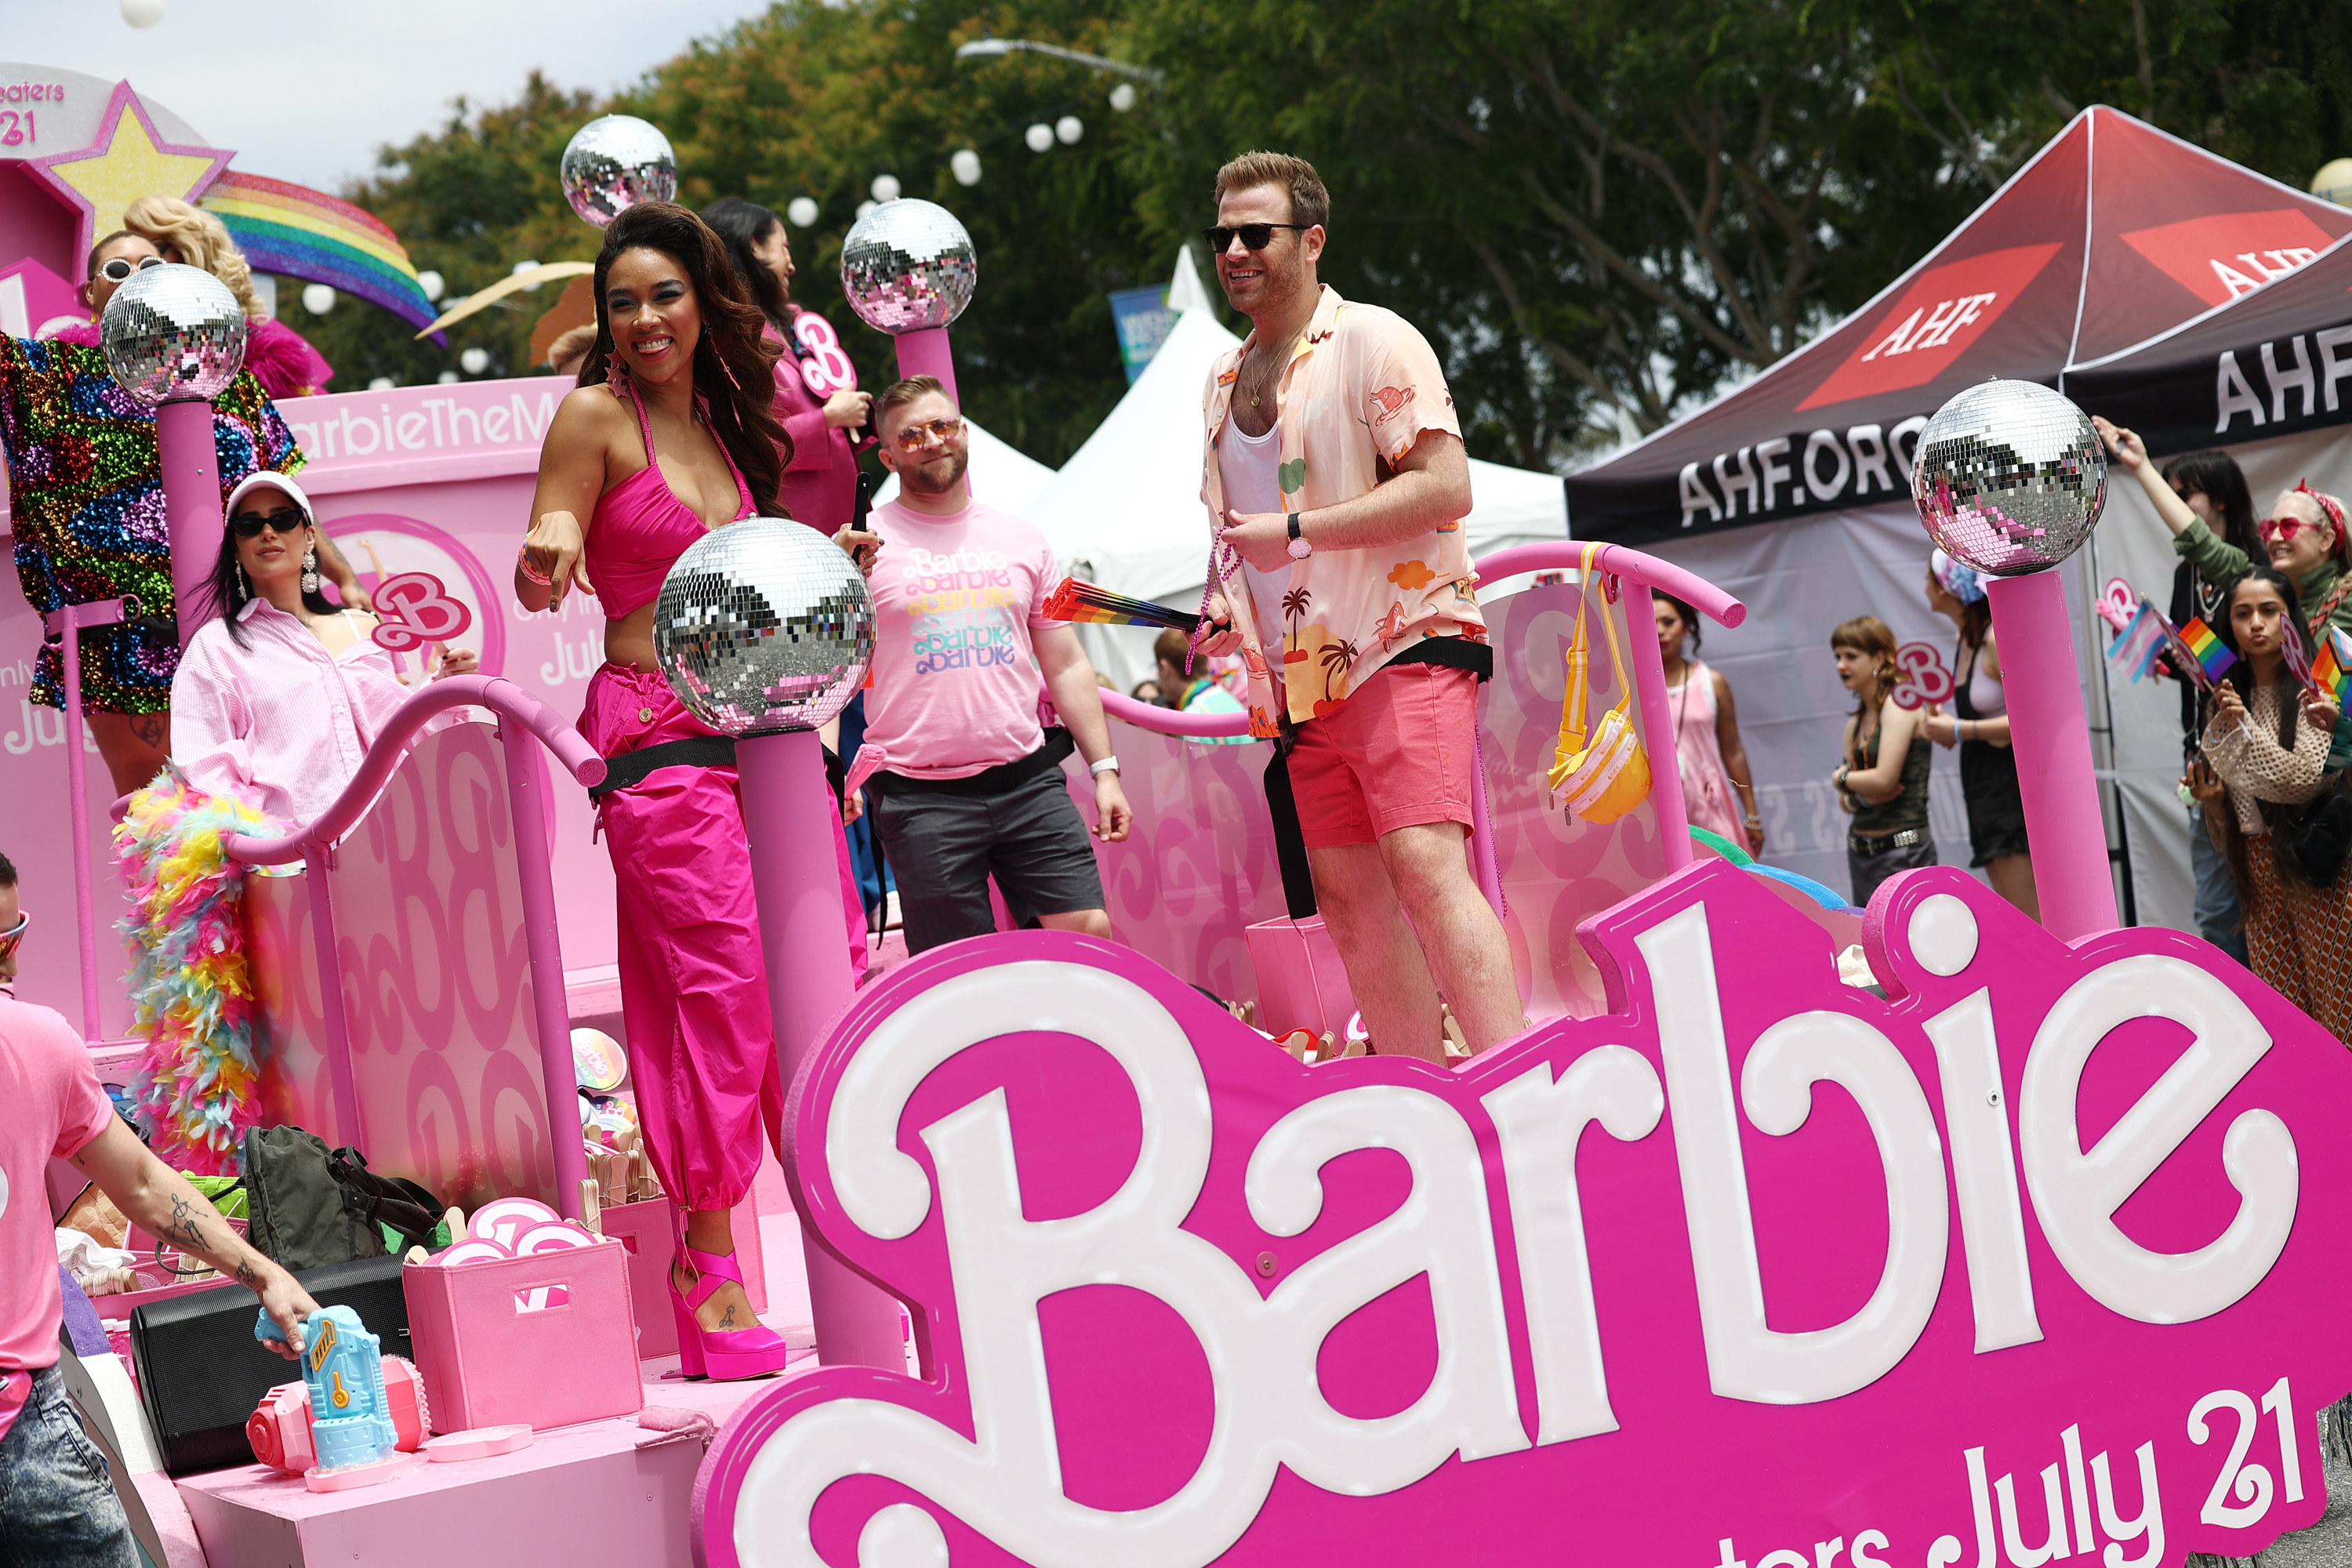 The &quot;Barbie&quot; float at the Pride parade